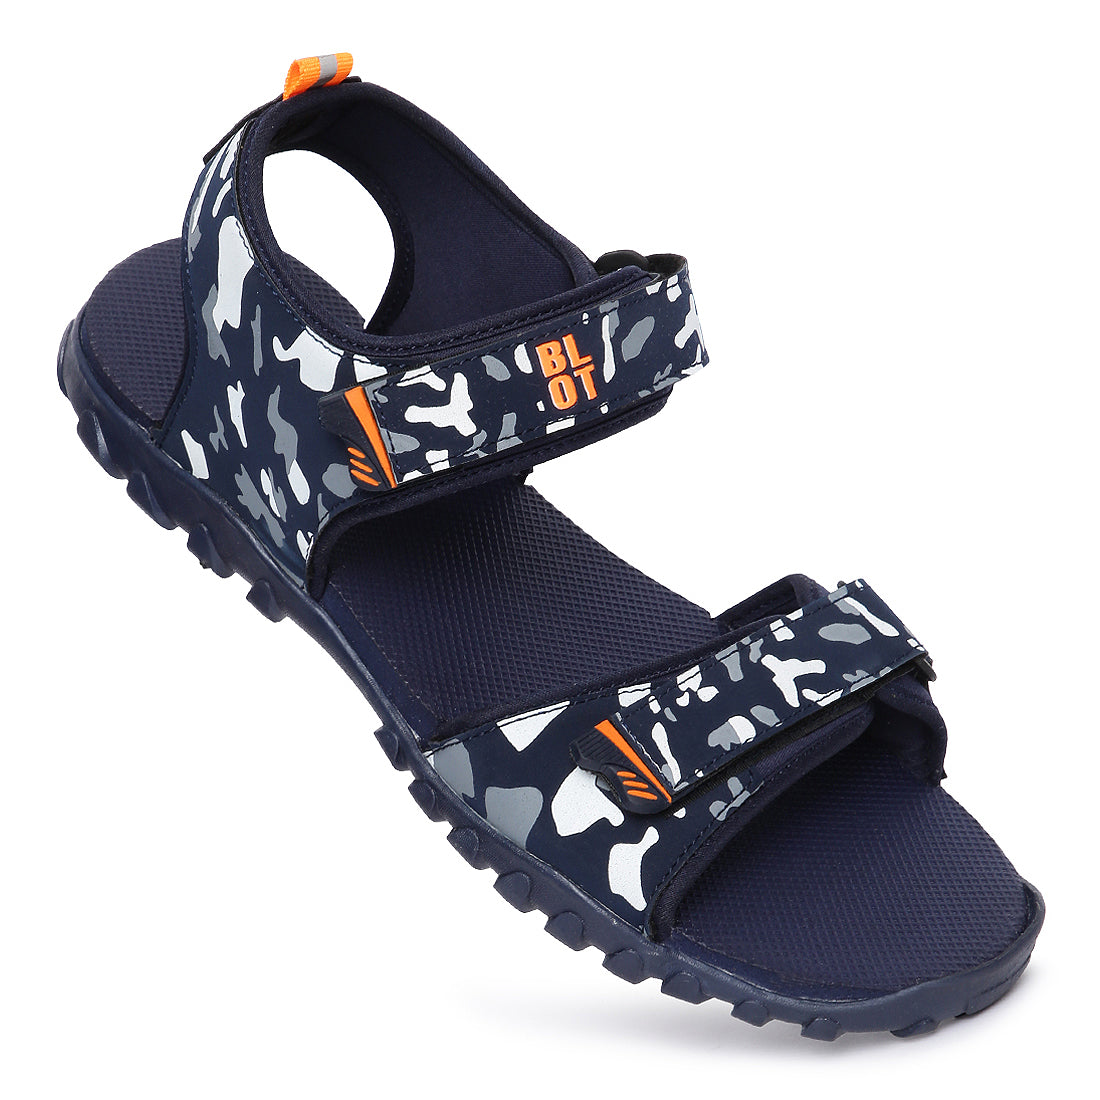 Paragon Blot K1406G Men Stylish Sandals | Comfortable Sandals for Daily Outdoor Use | Casual Formal Sandals with Cushioned Soles